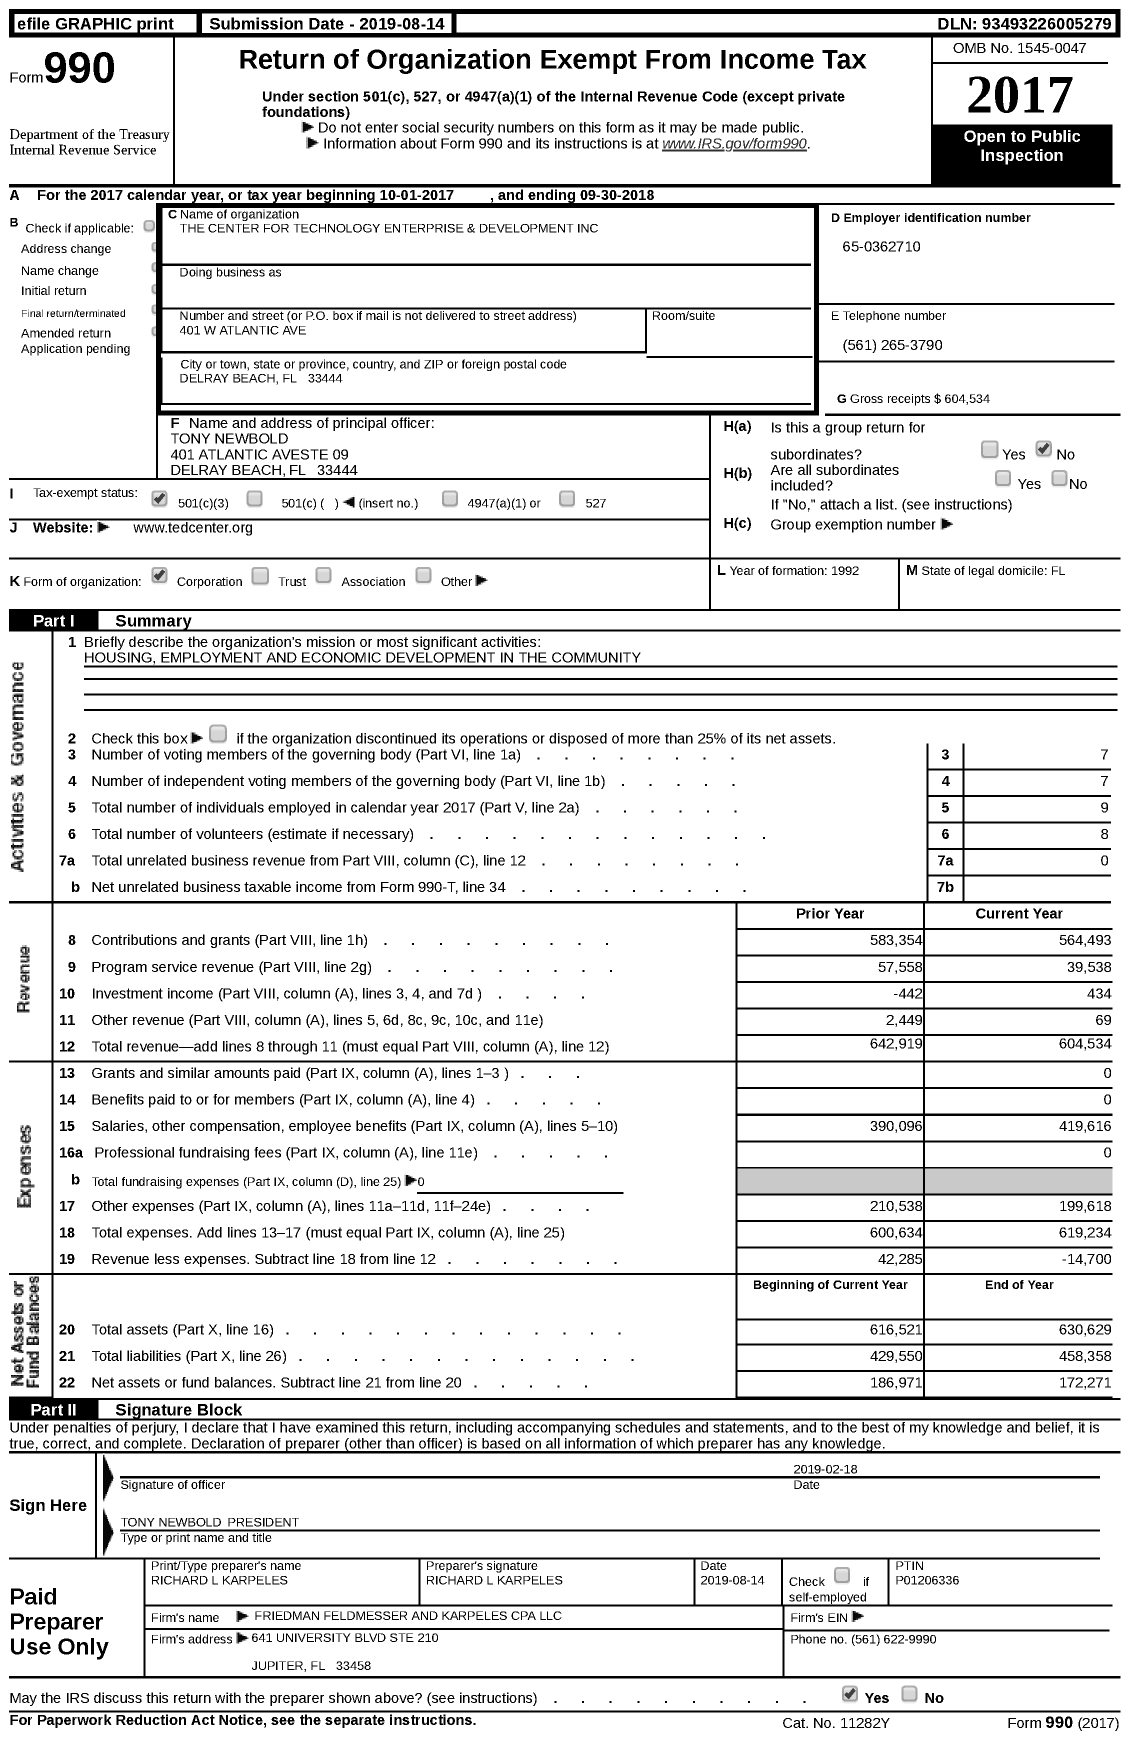 Image of first page of 2017 Form 990 for The Center for Technology Enterprise and Development